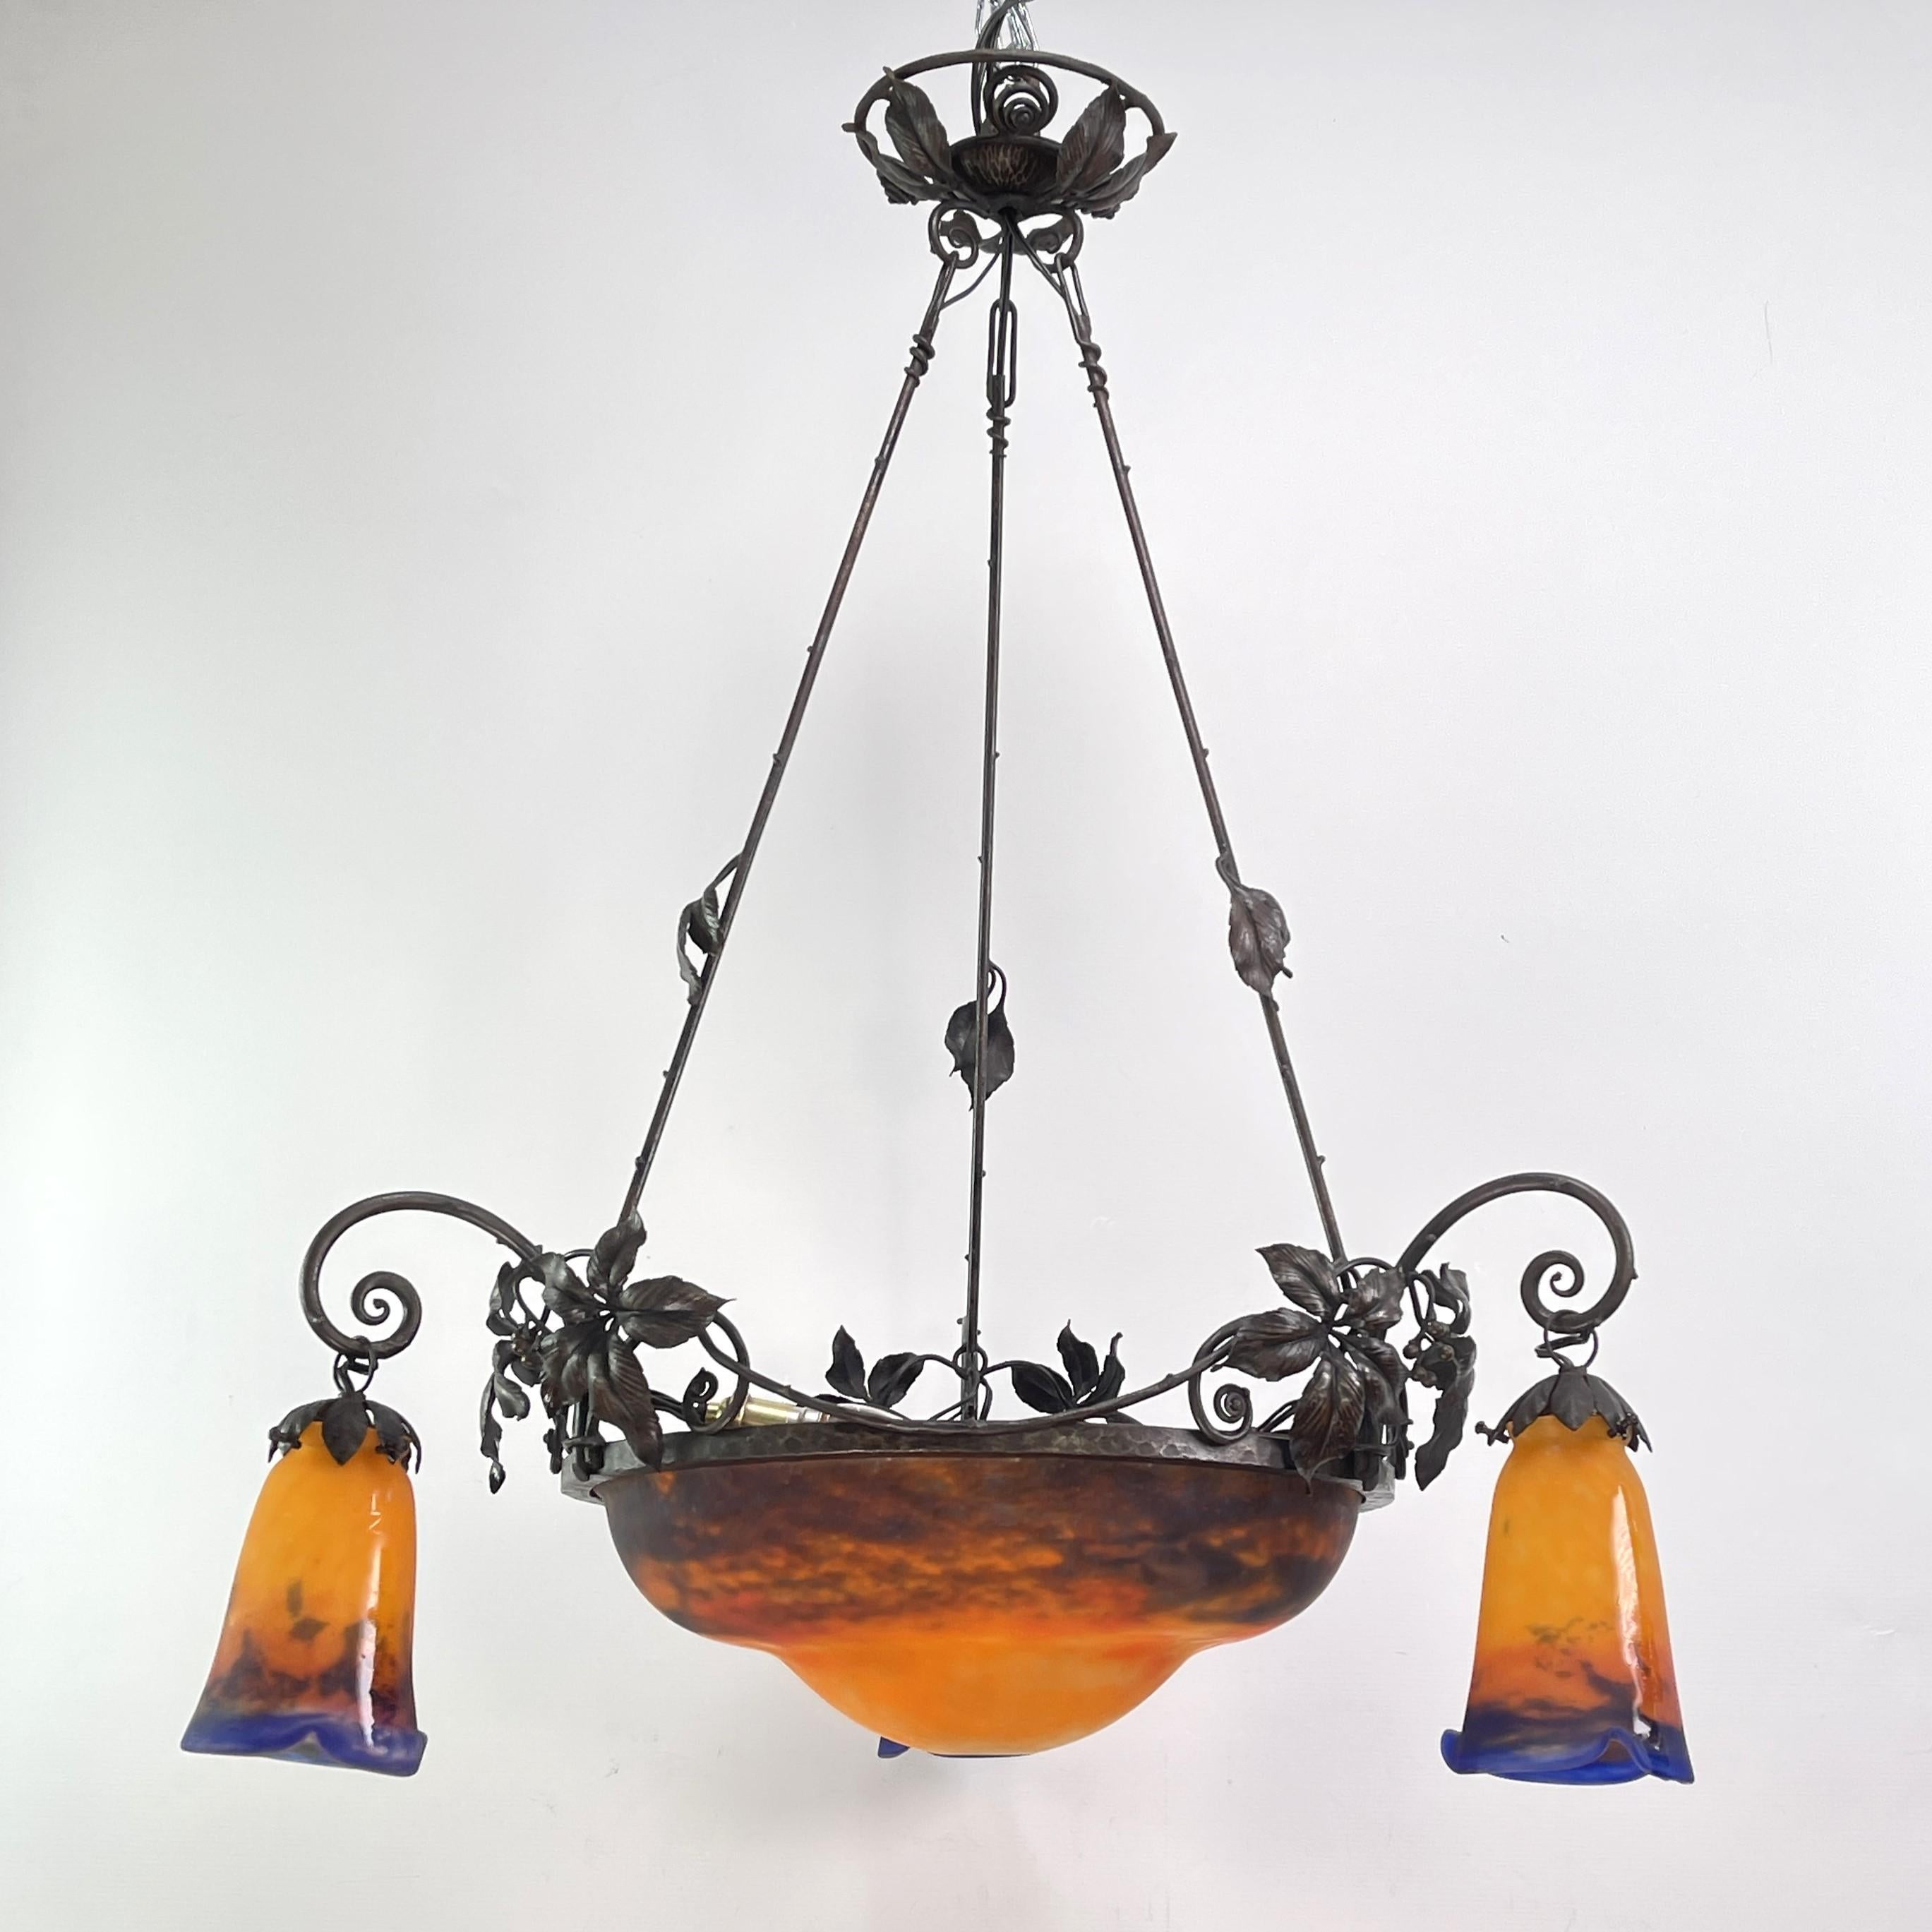 French Art Deco wrought iron Lamp by Muller Freres, Luneville Pate de Verre, 1930s For Sale